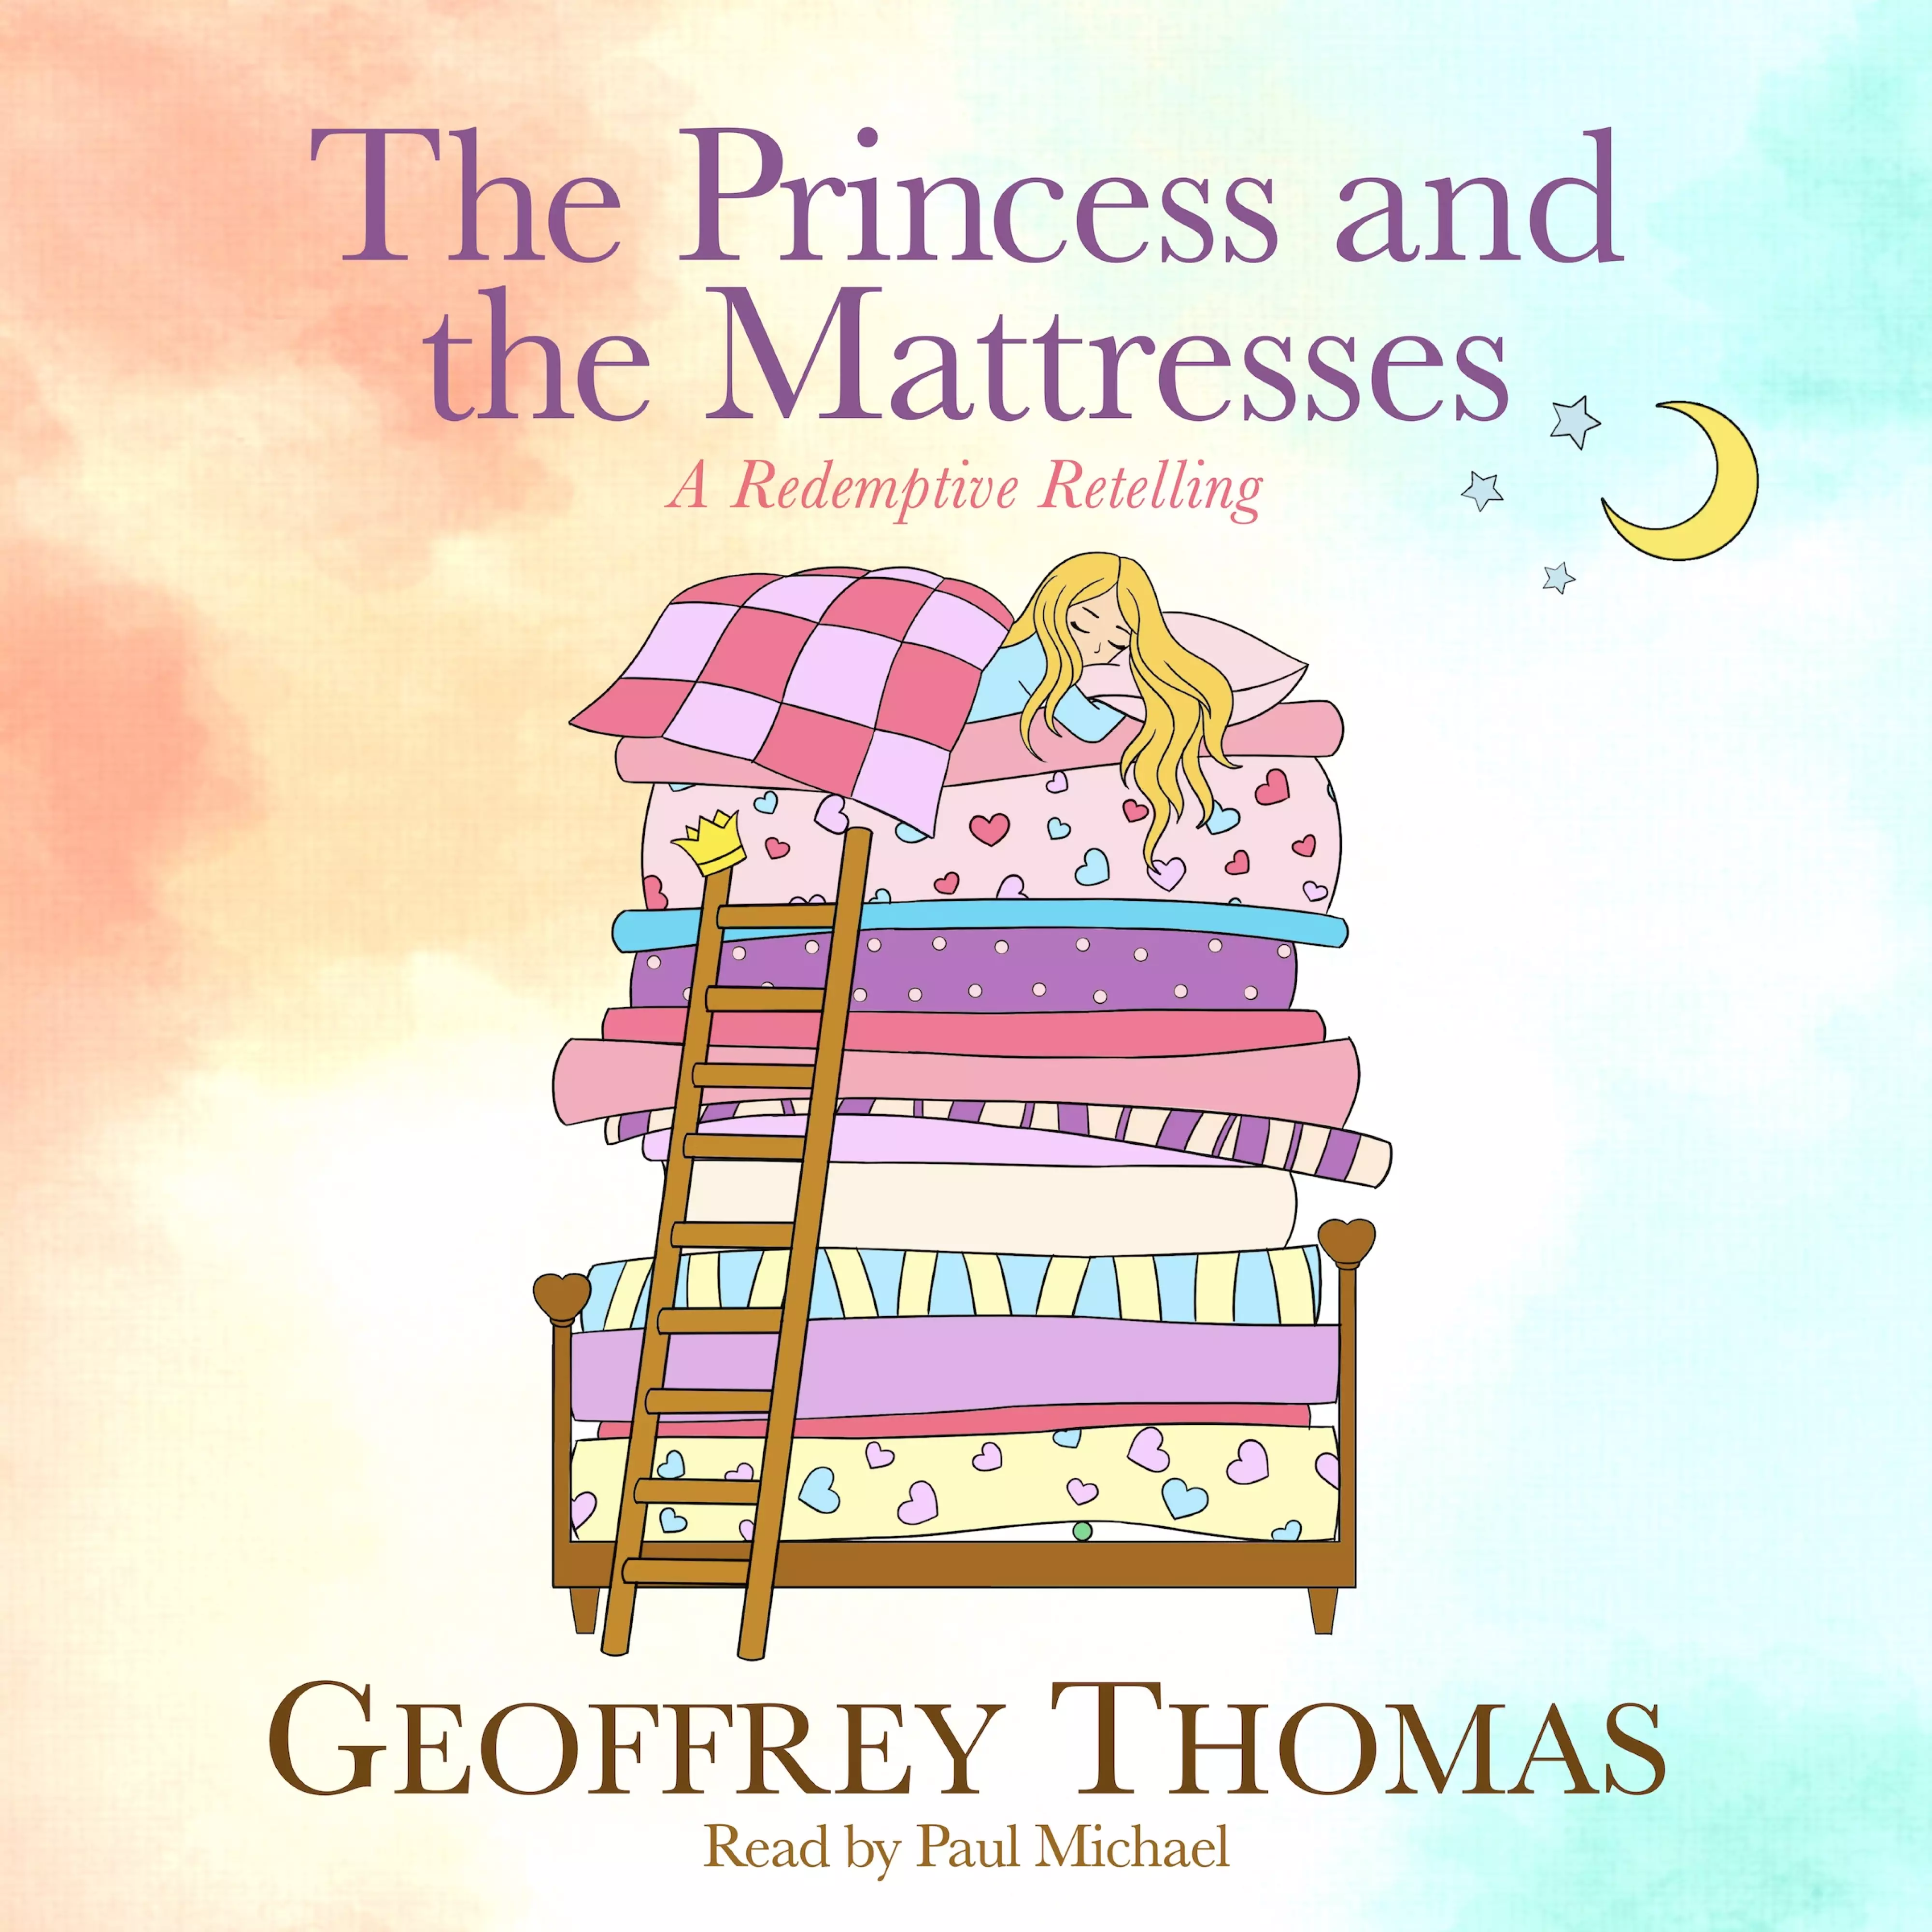 The Princess and the Mattresses